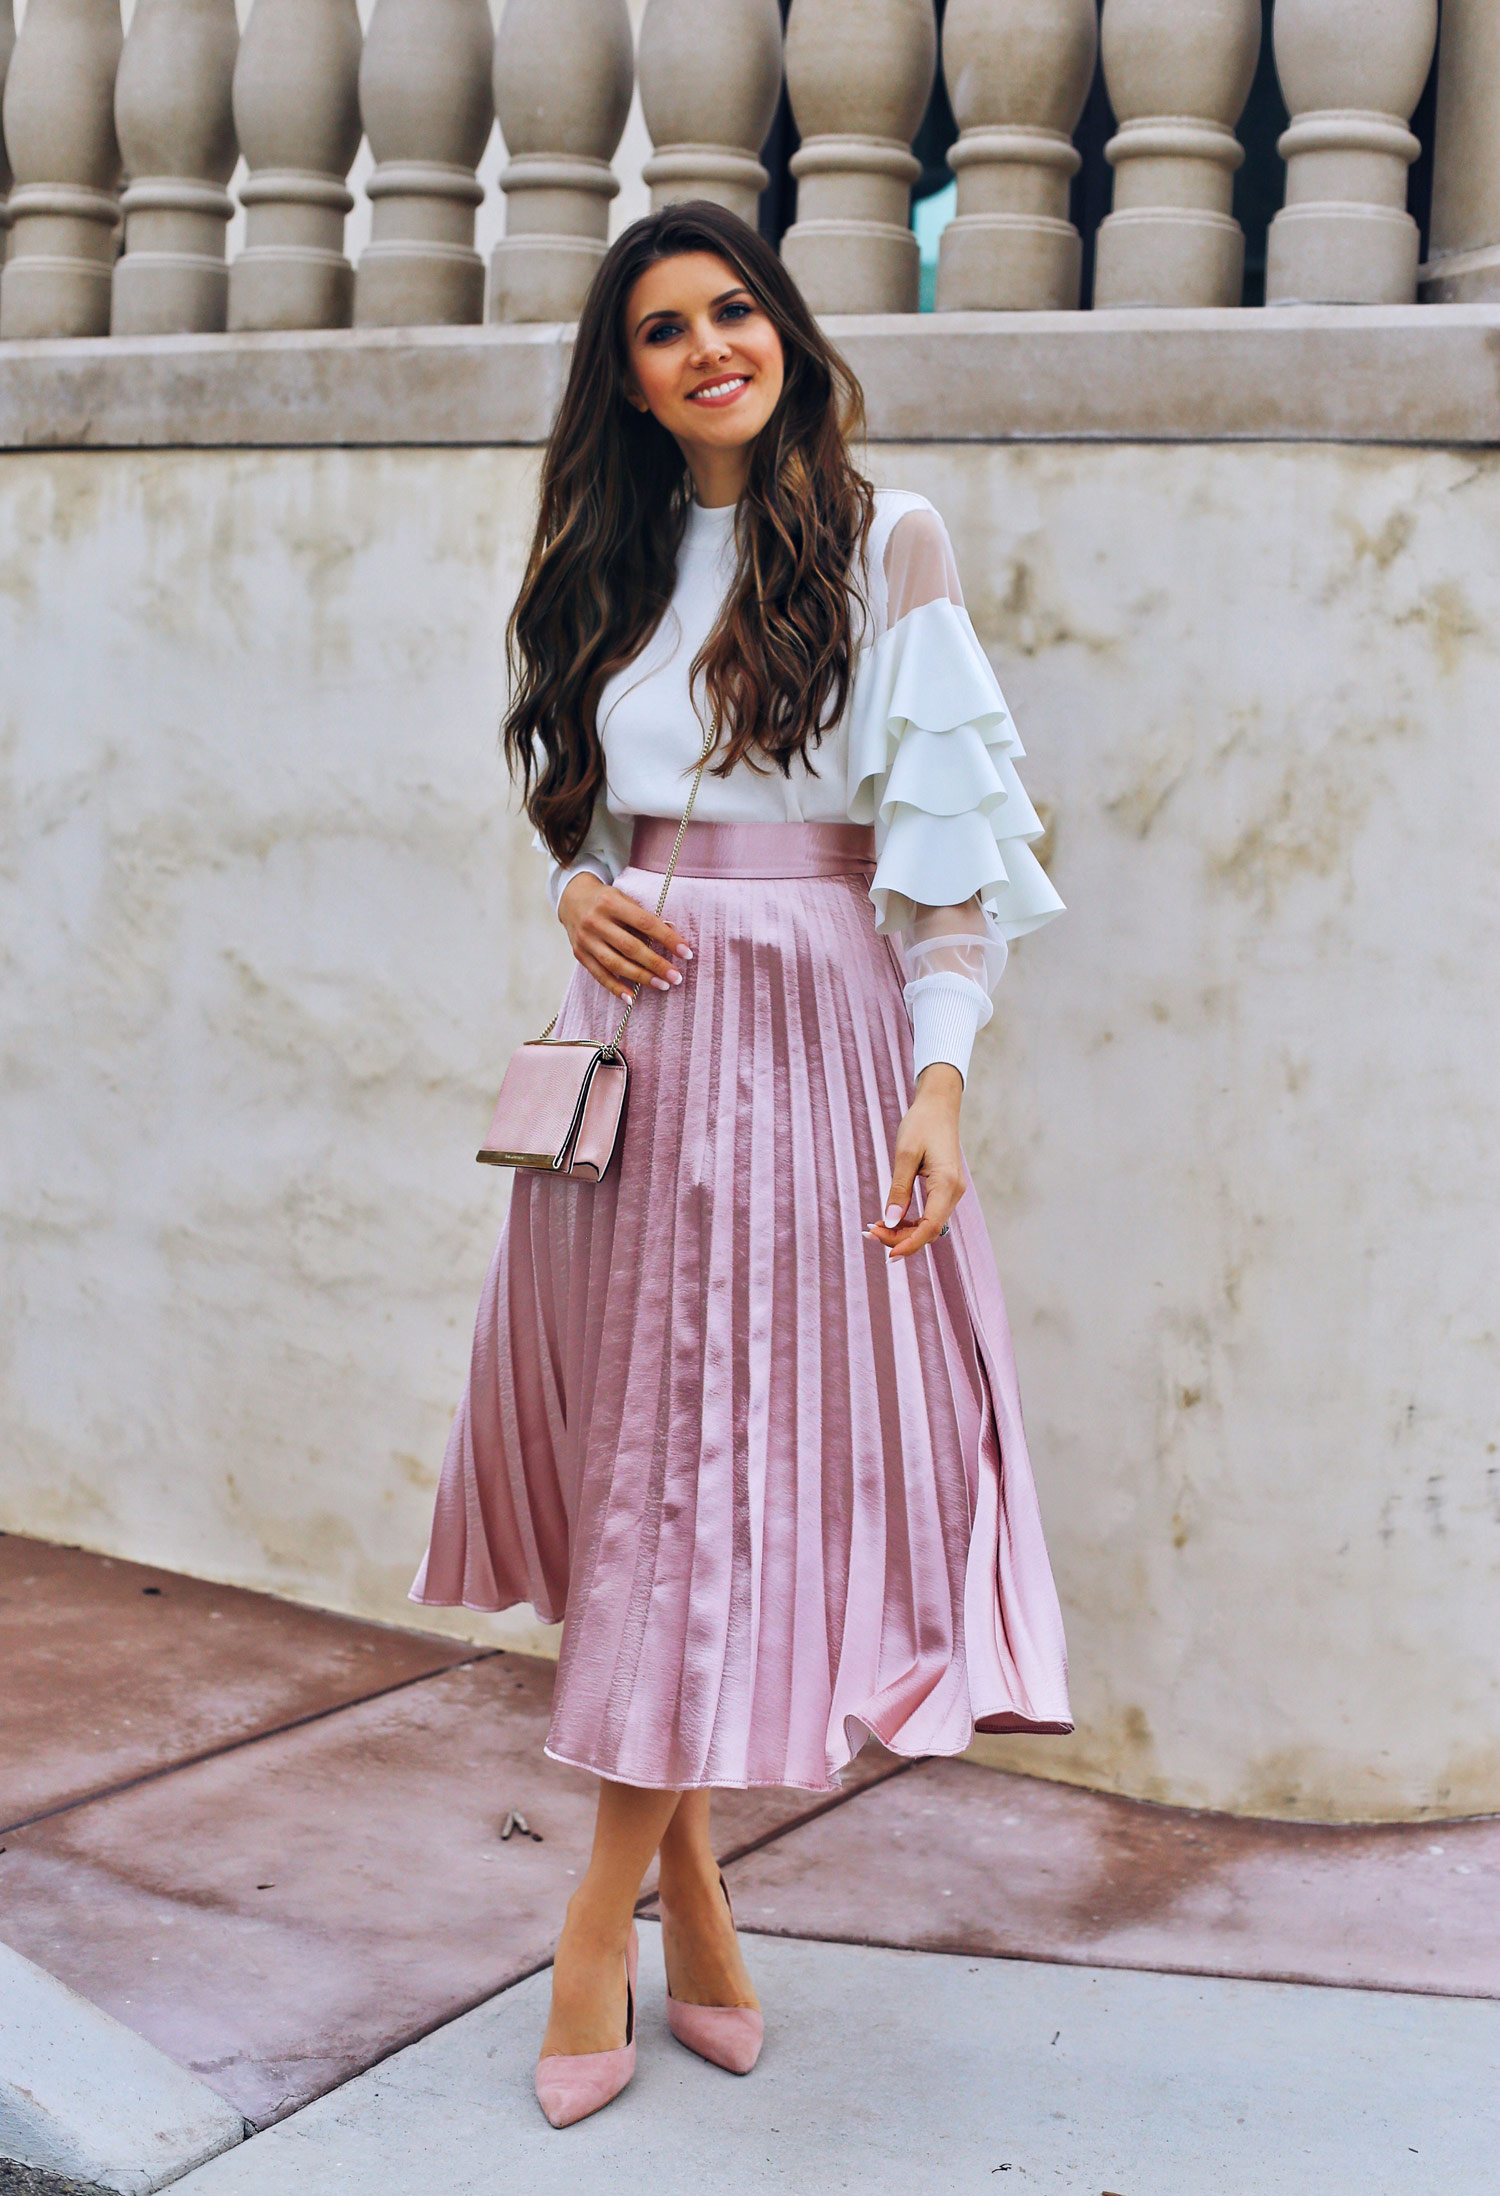 Fashion and lifestyle blogger Adelina Perrin of The Charming Olive wearing Chicwish tiered sleeve top and pink pleated skirt